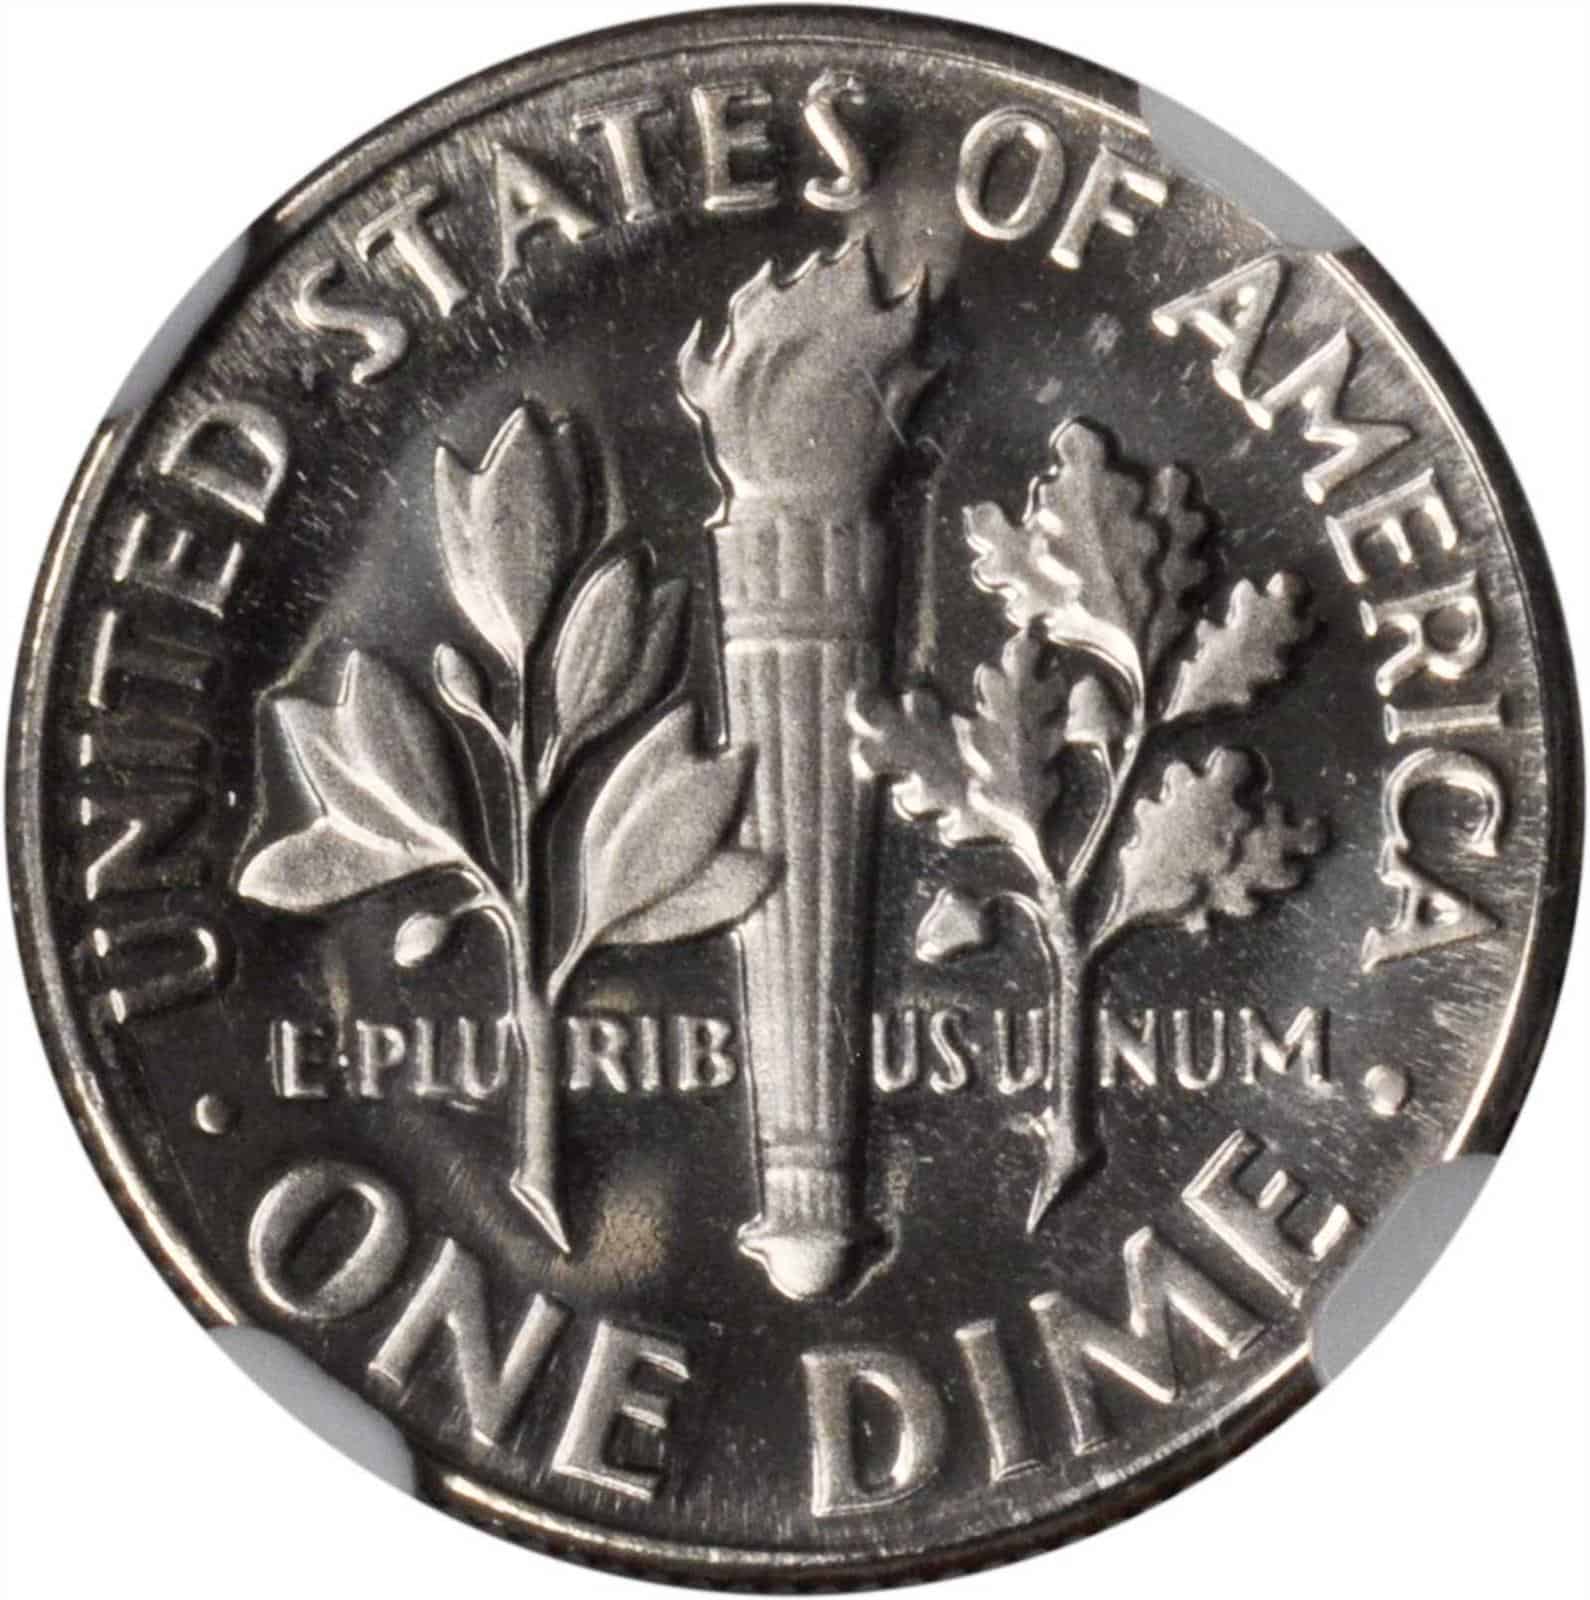 The Reverse of 1967 Dime